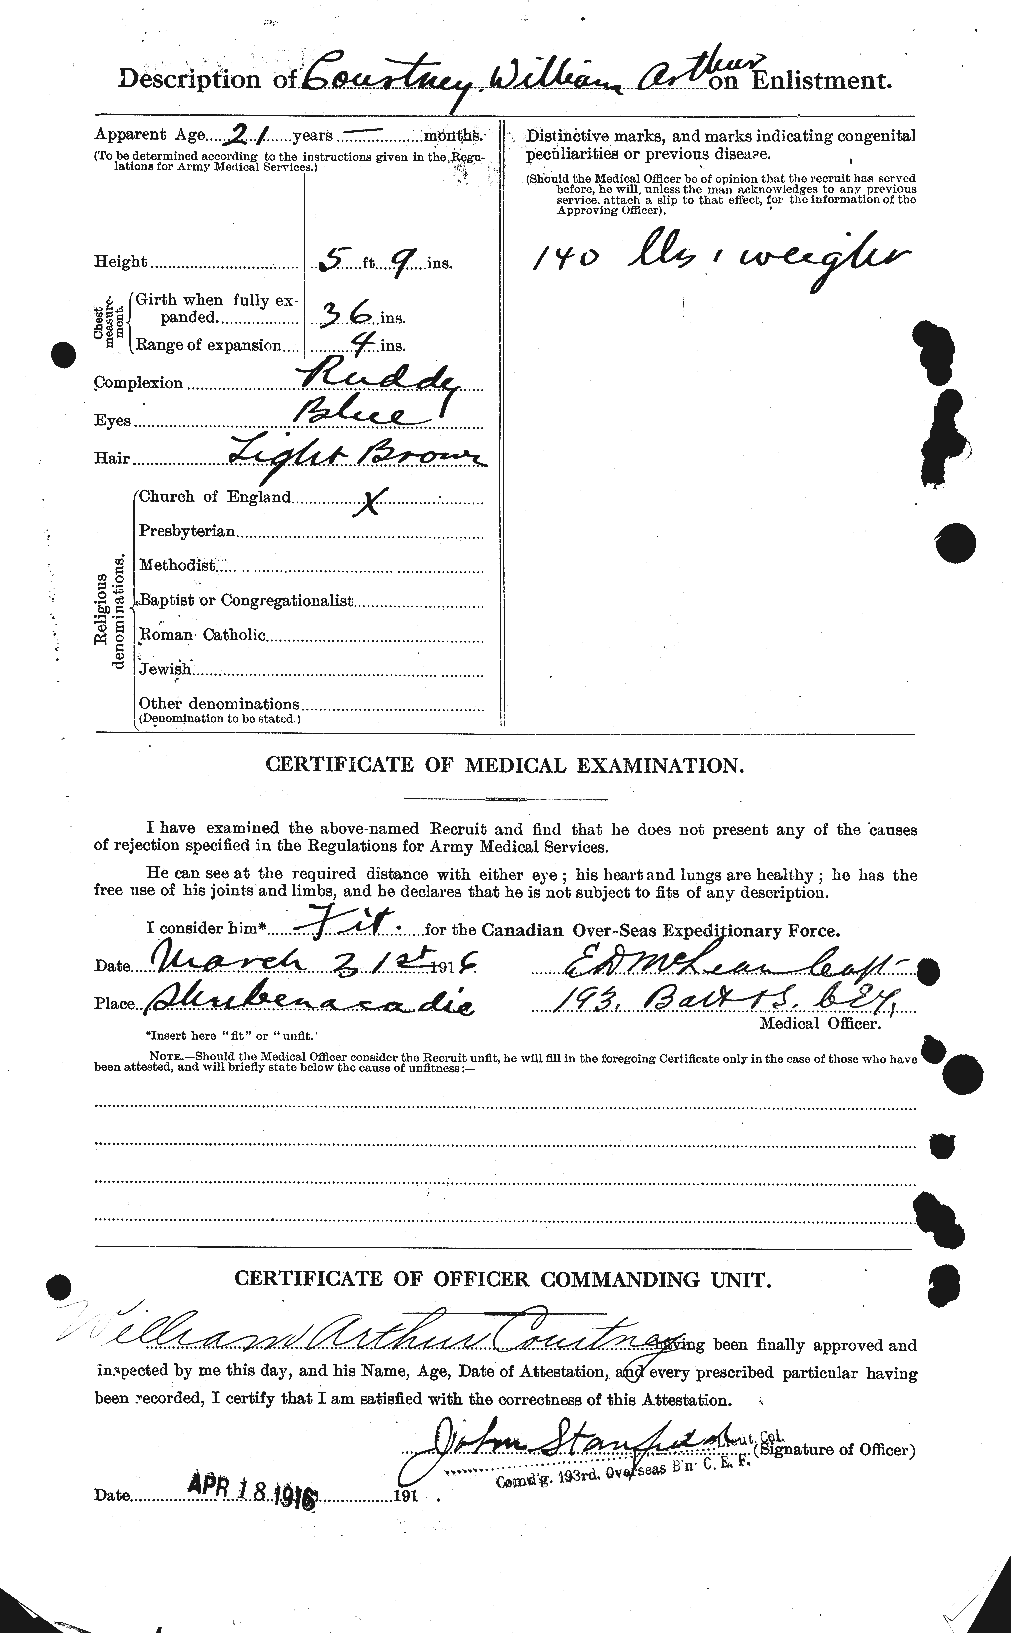 Personnel Records of the First World War - CEF 059088b